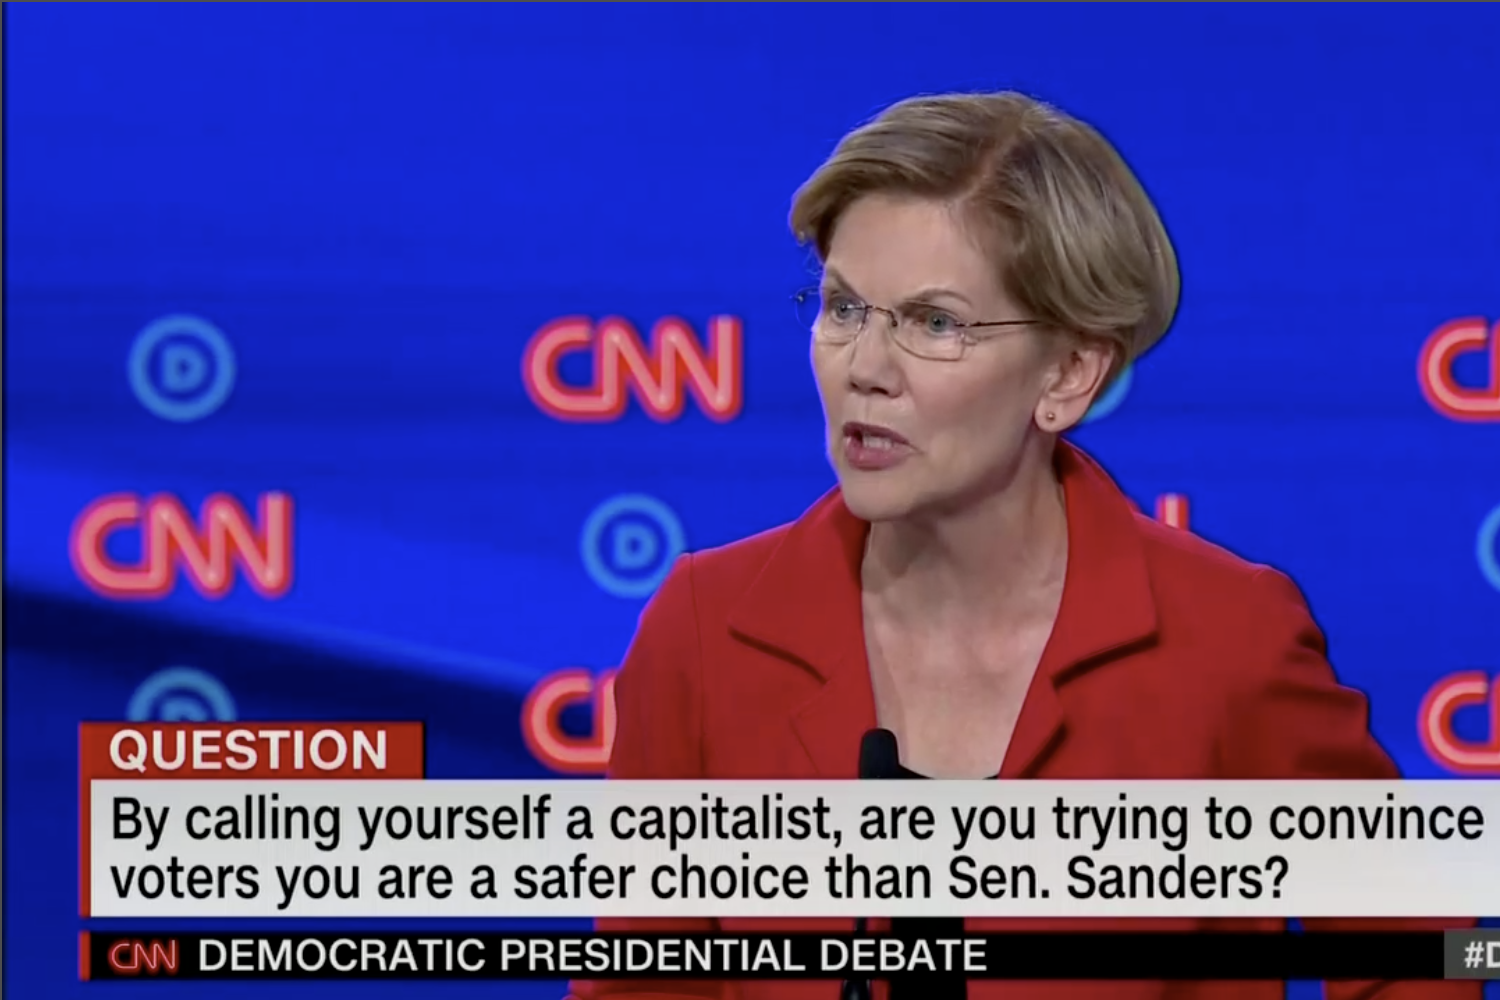 In this screengrab from CNN, Elizabeth Warren debates. The banner reads: "By calling yourself a capitalist, are you trying to convince voters you are a safer choice than Sen. Sanders?"